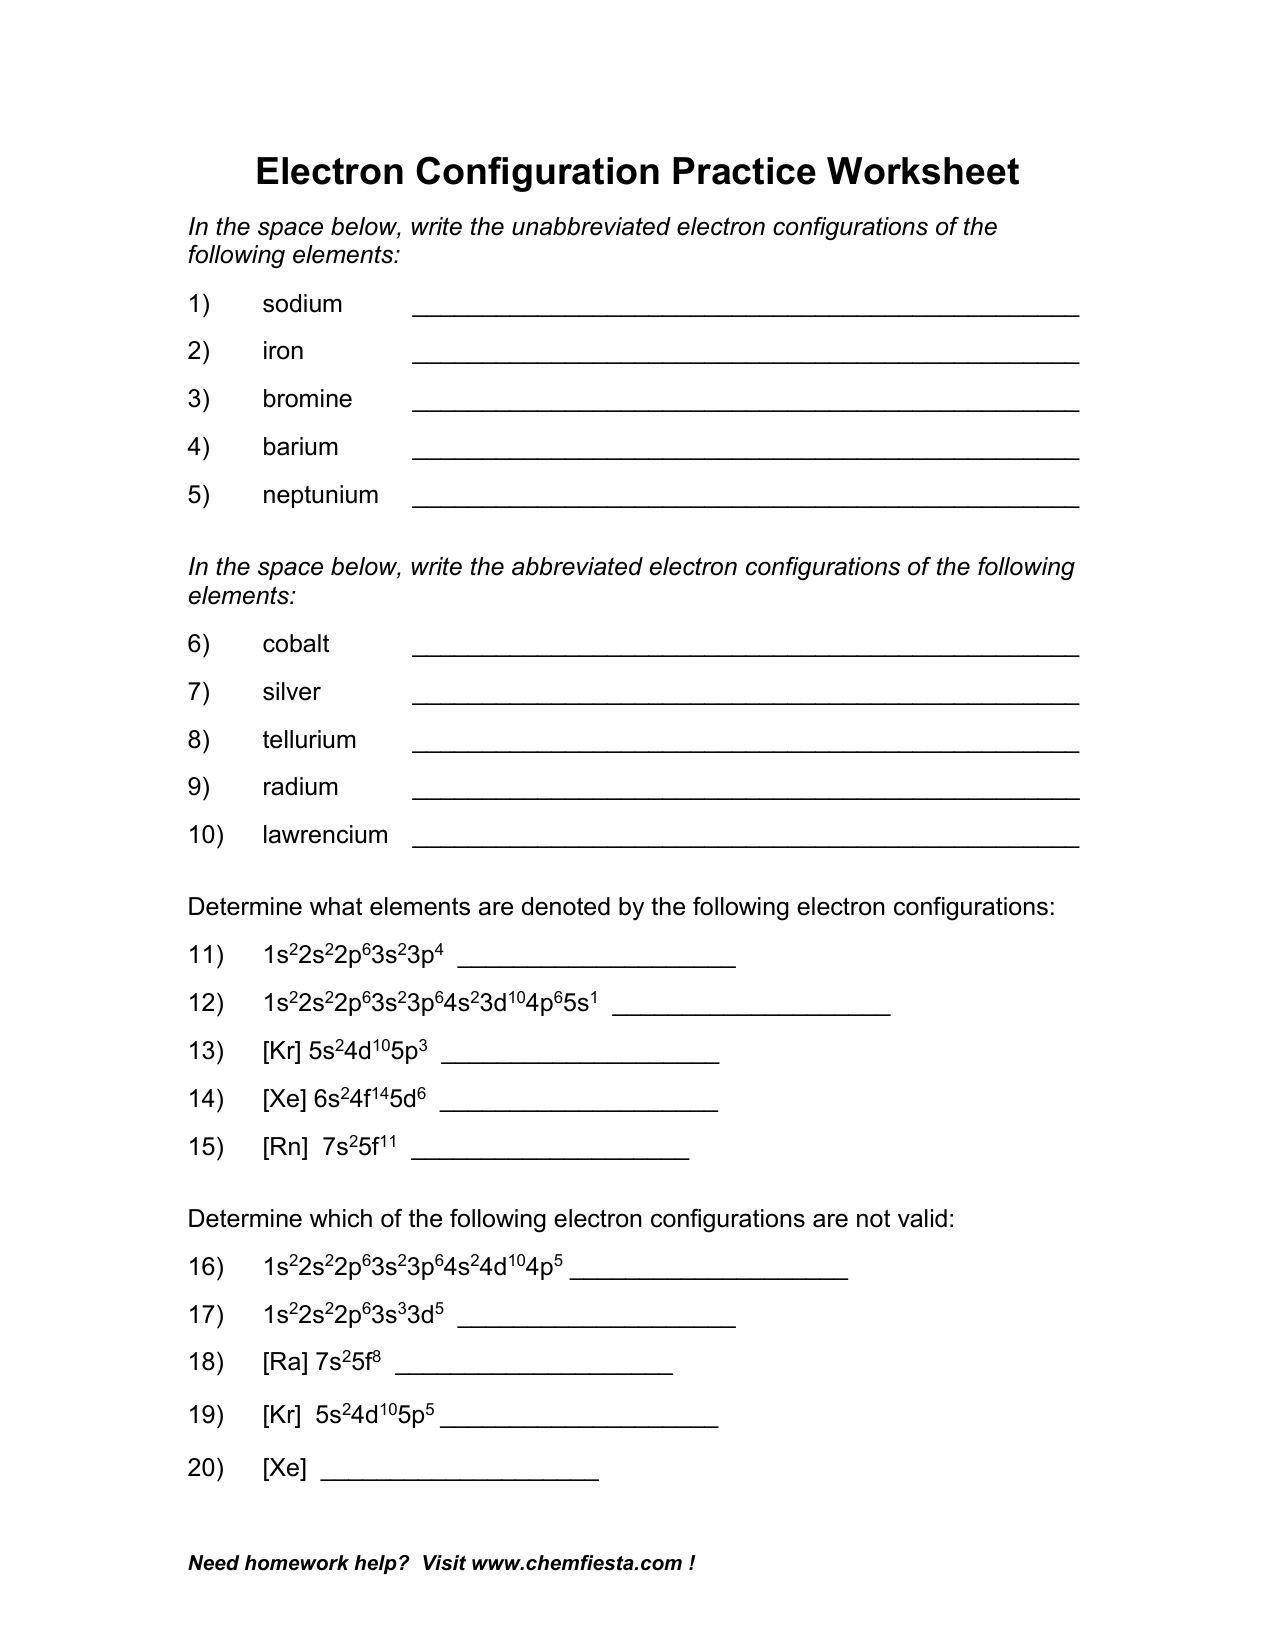 Electron Configuration Practice Worksheet Pertaining To Electron Configuration Practice Worksheet Answers